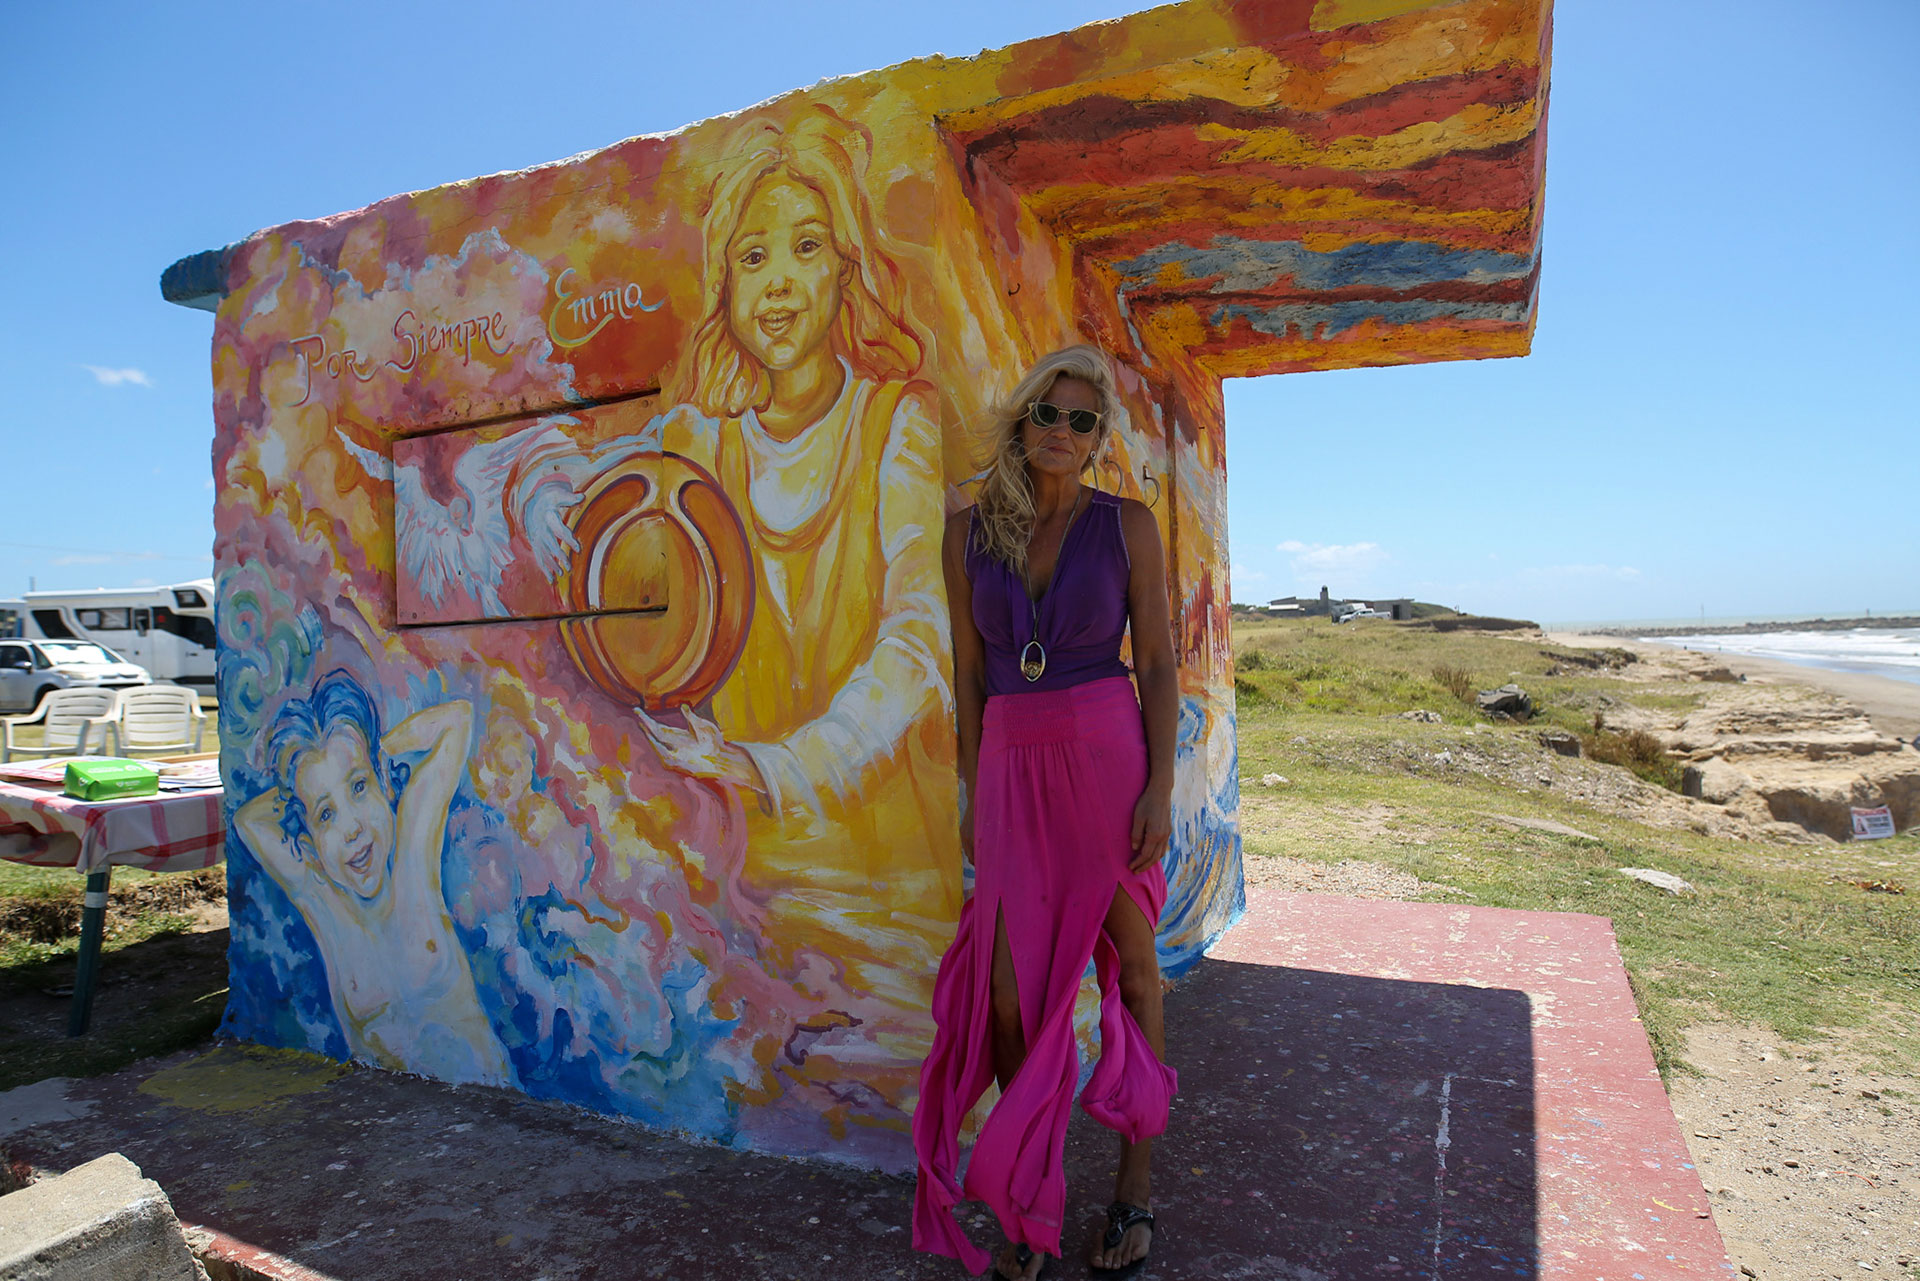 Local artist Emilia Leo spent ten days painting the structure and was thanked by Emma's parents